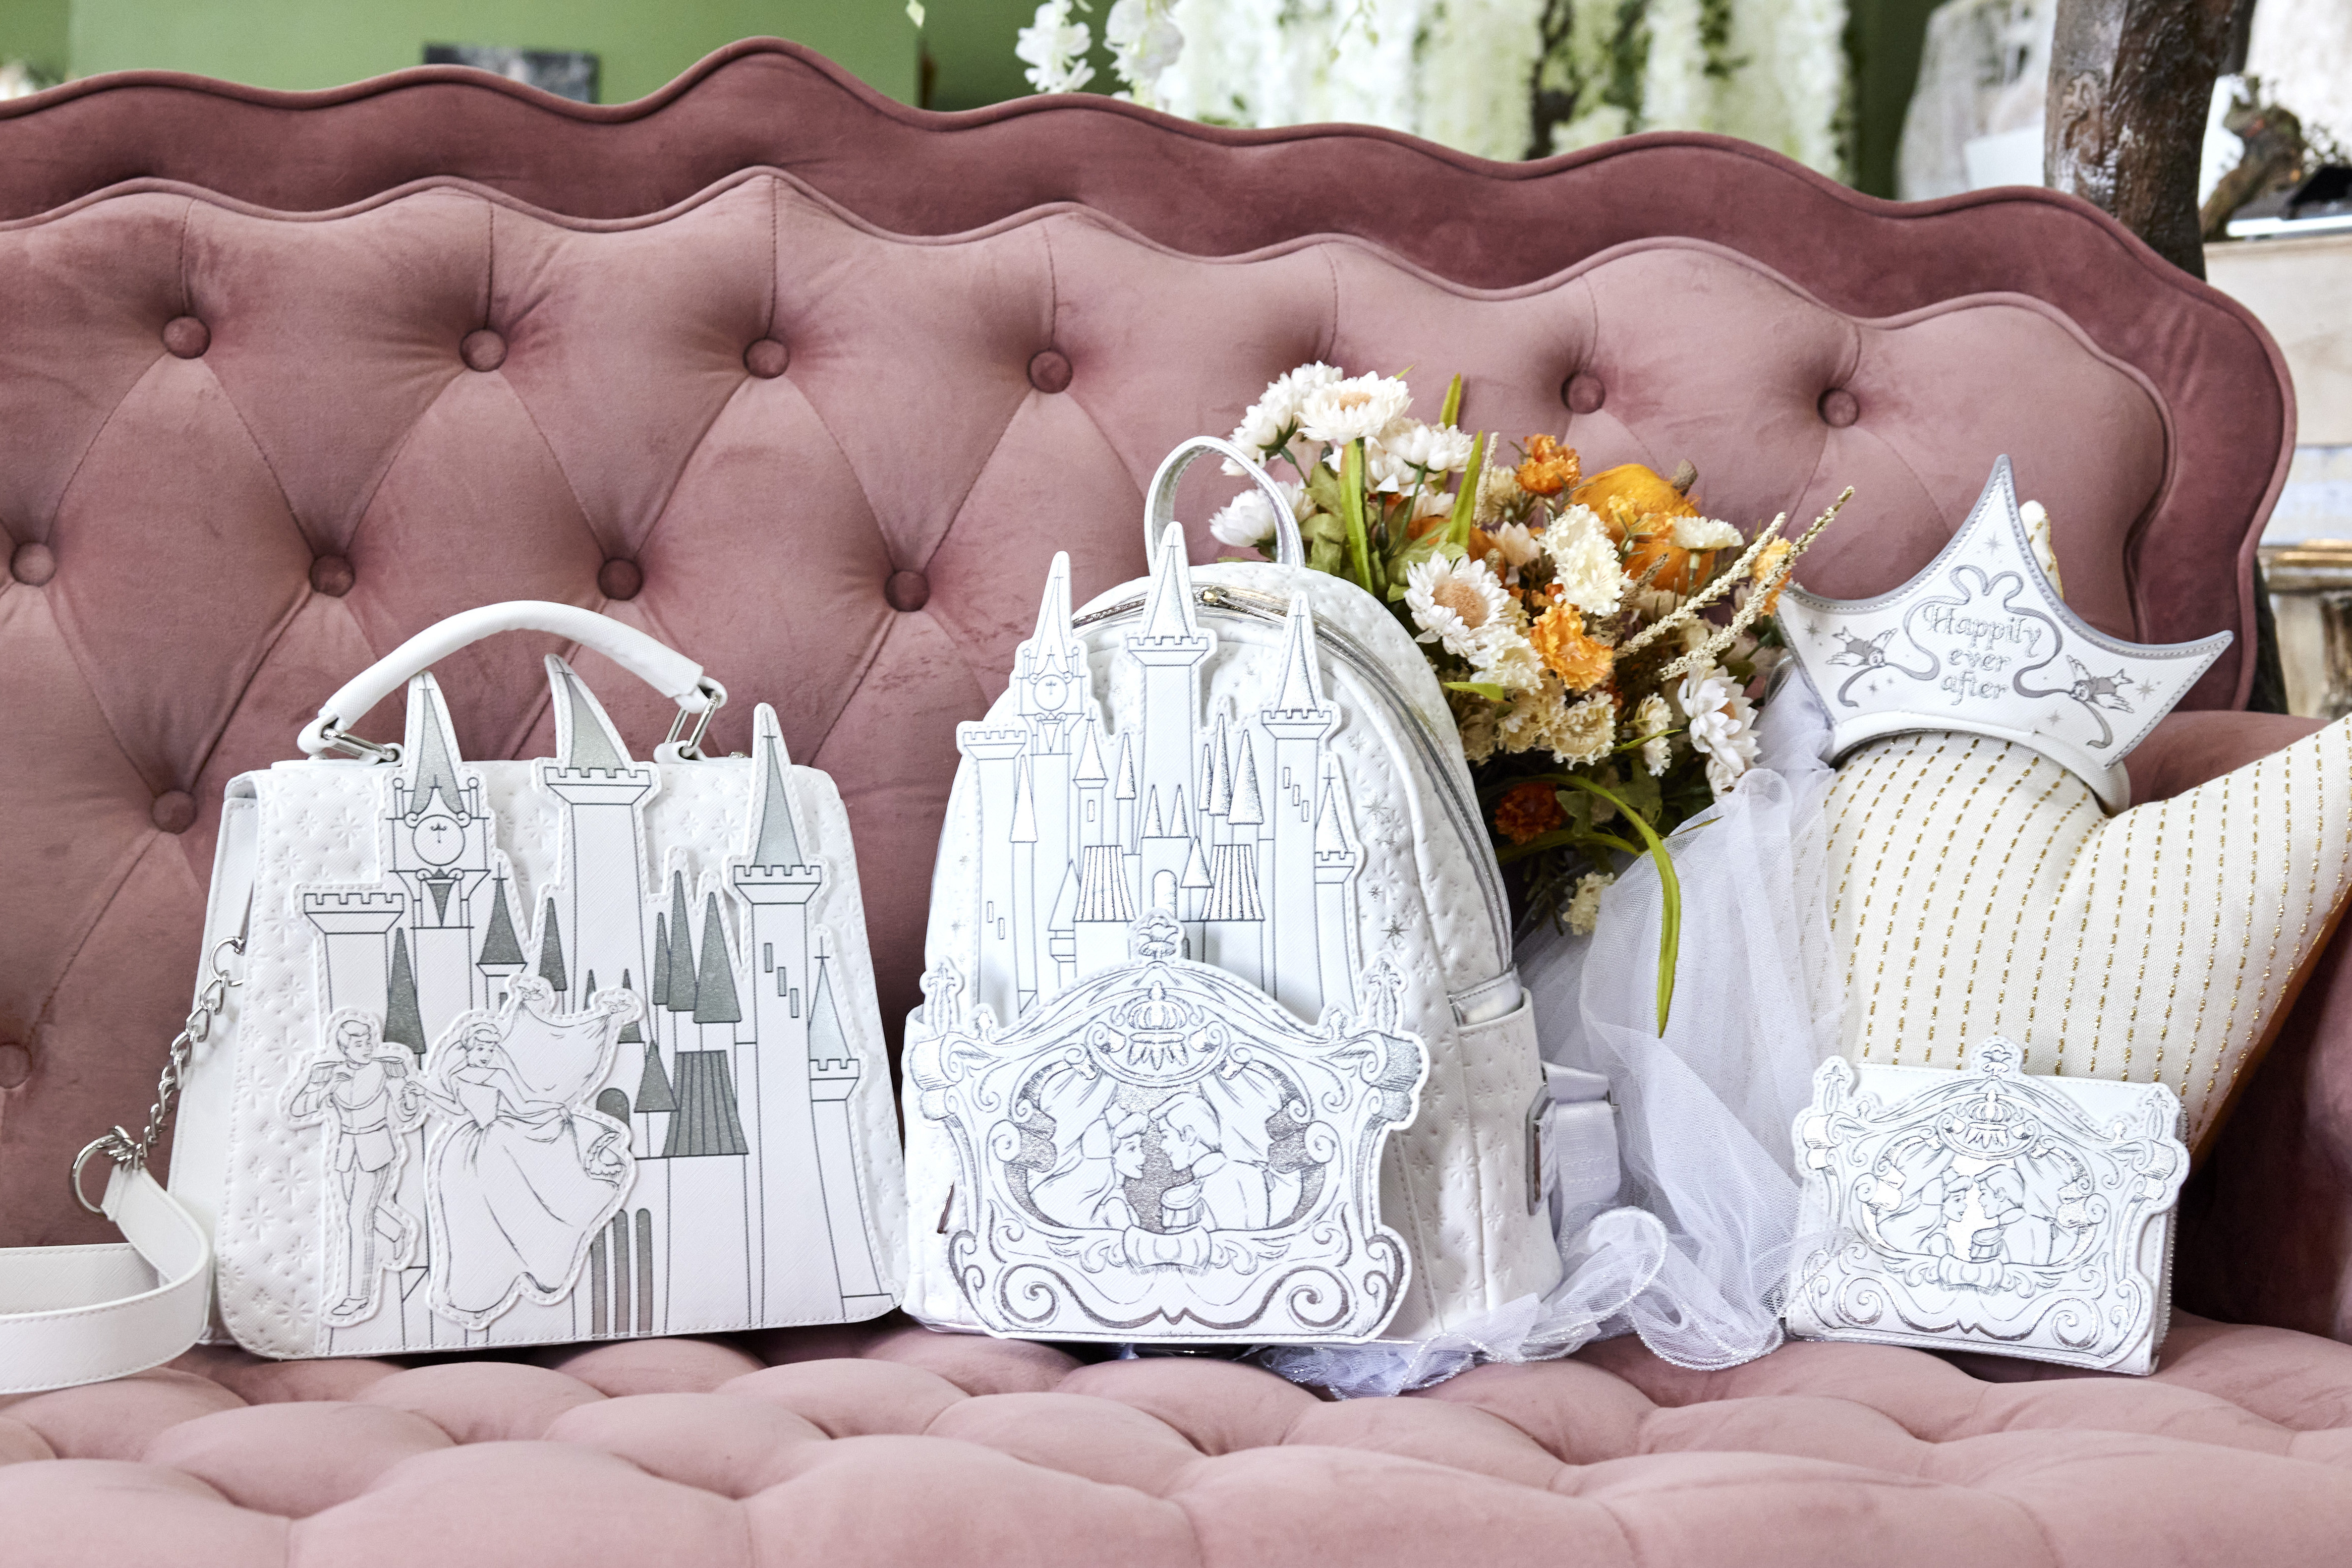 Loungefly and Disney’s Happily Ever After set of Cinderella accessories, including a headband, backpack, crossbody bag, wallet, and enamel pin.